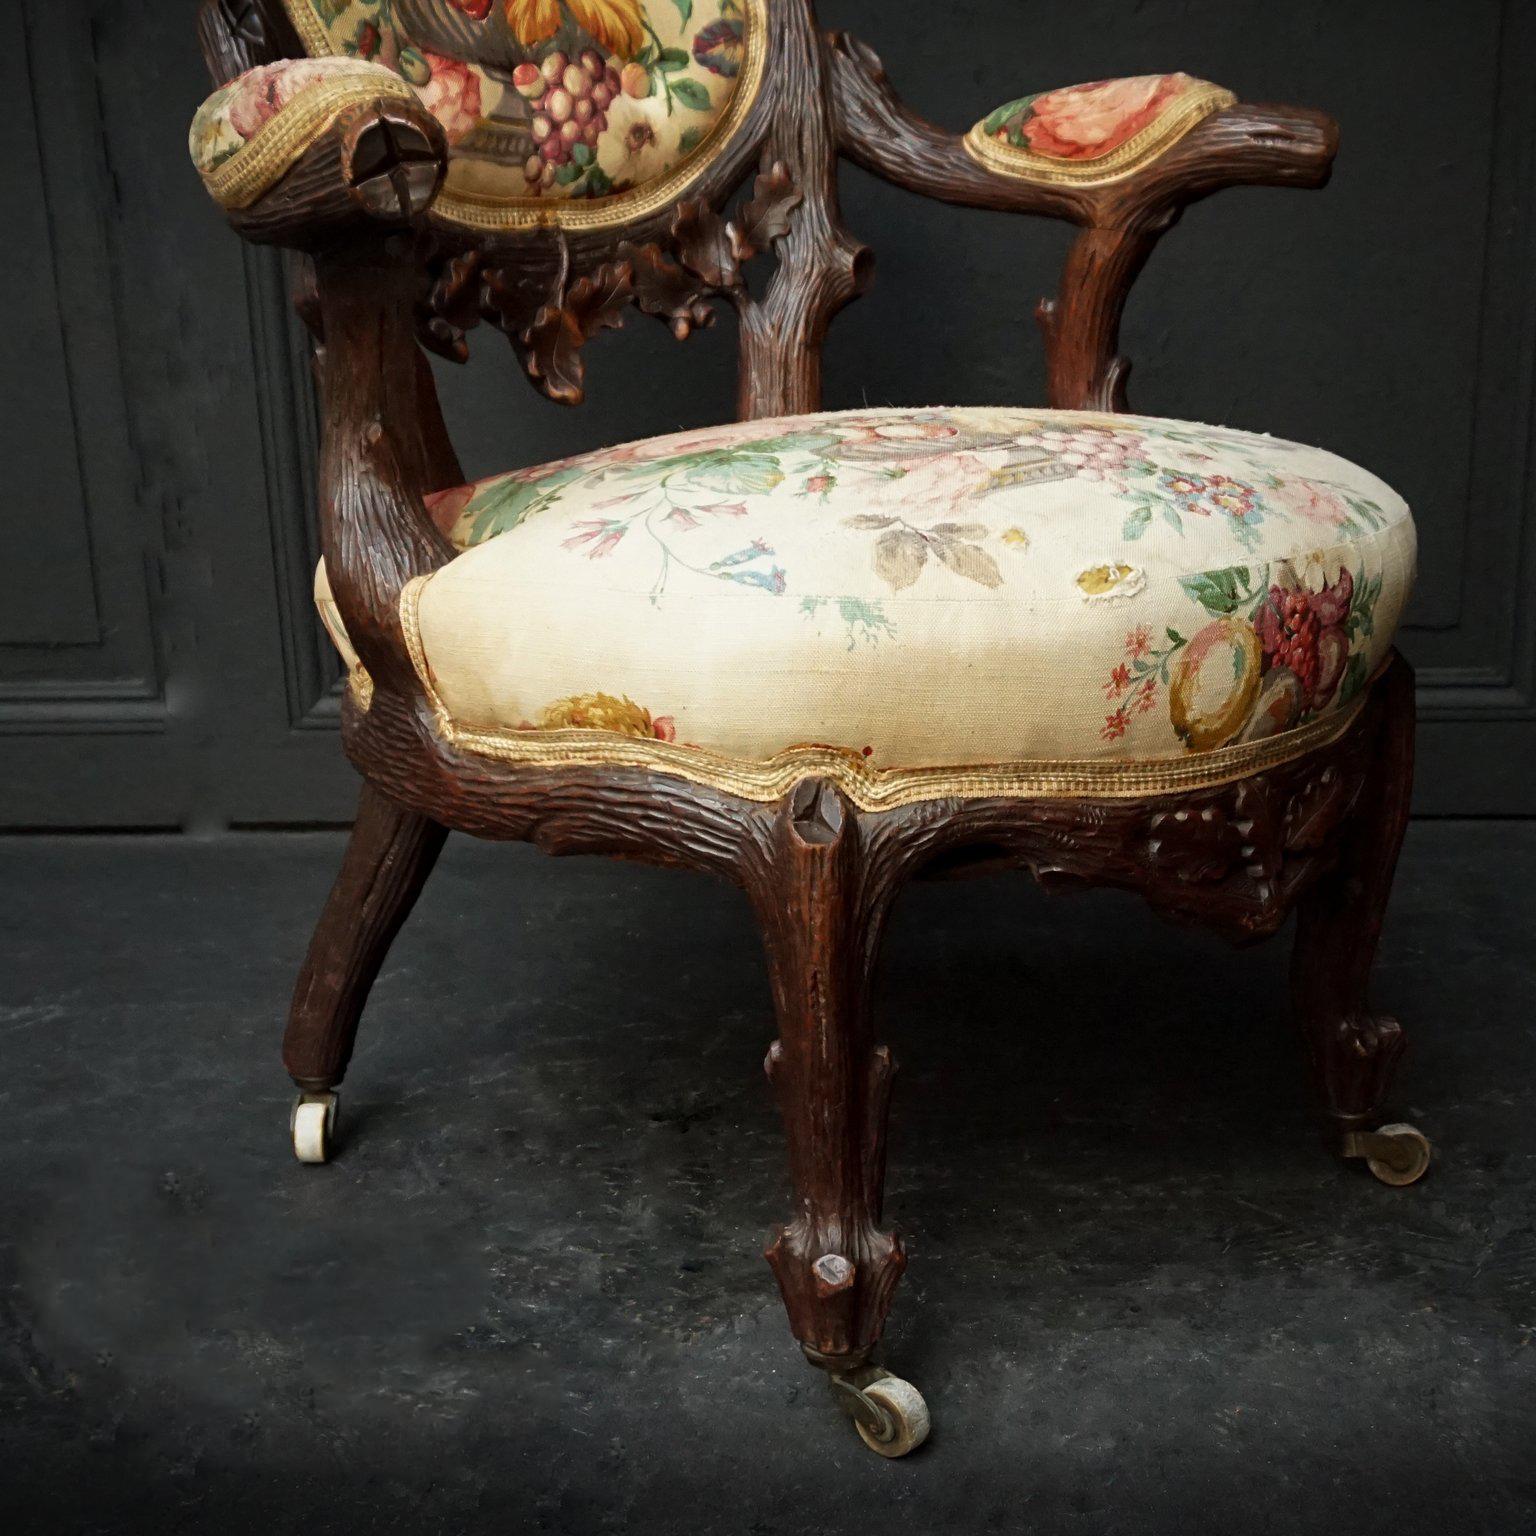 19th Century Swiss Black Forest Carved Walnut and Fabric Upholstered Armchair For Sale 3